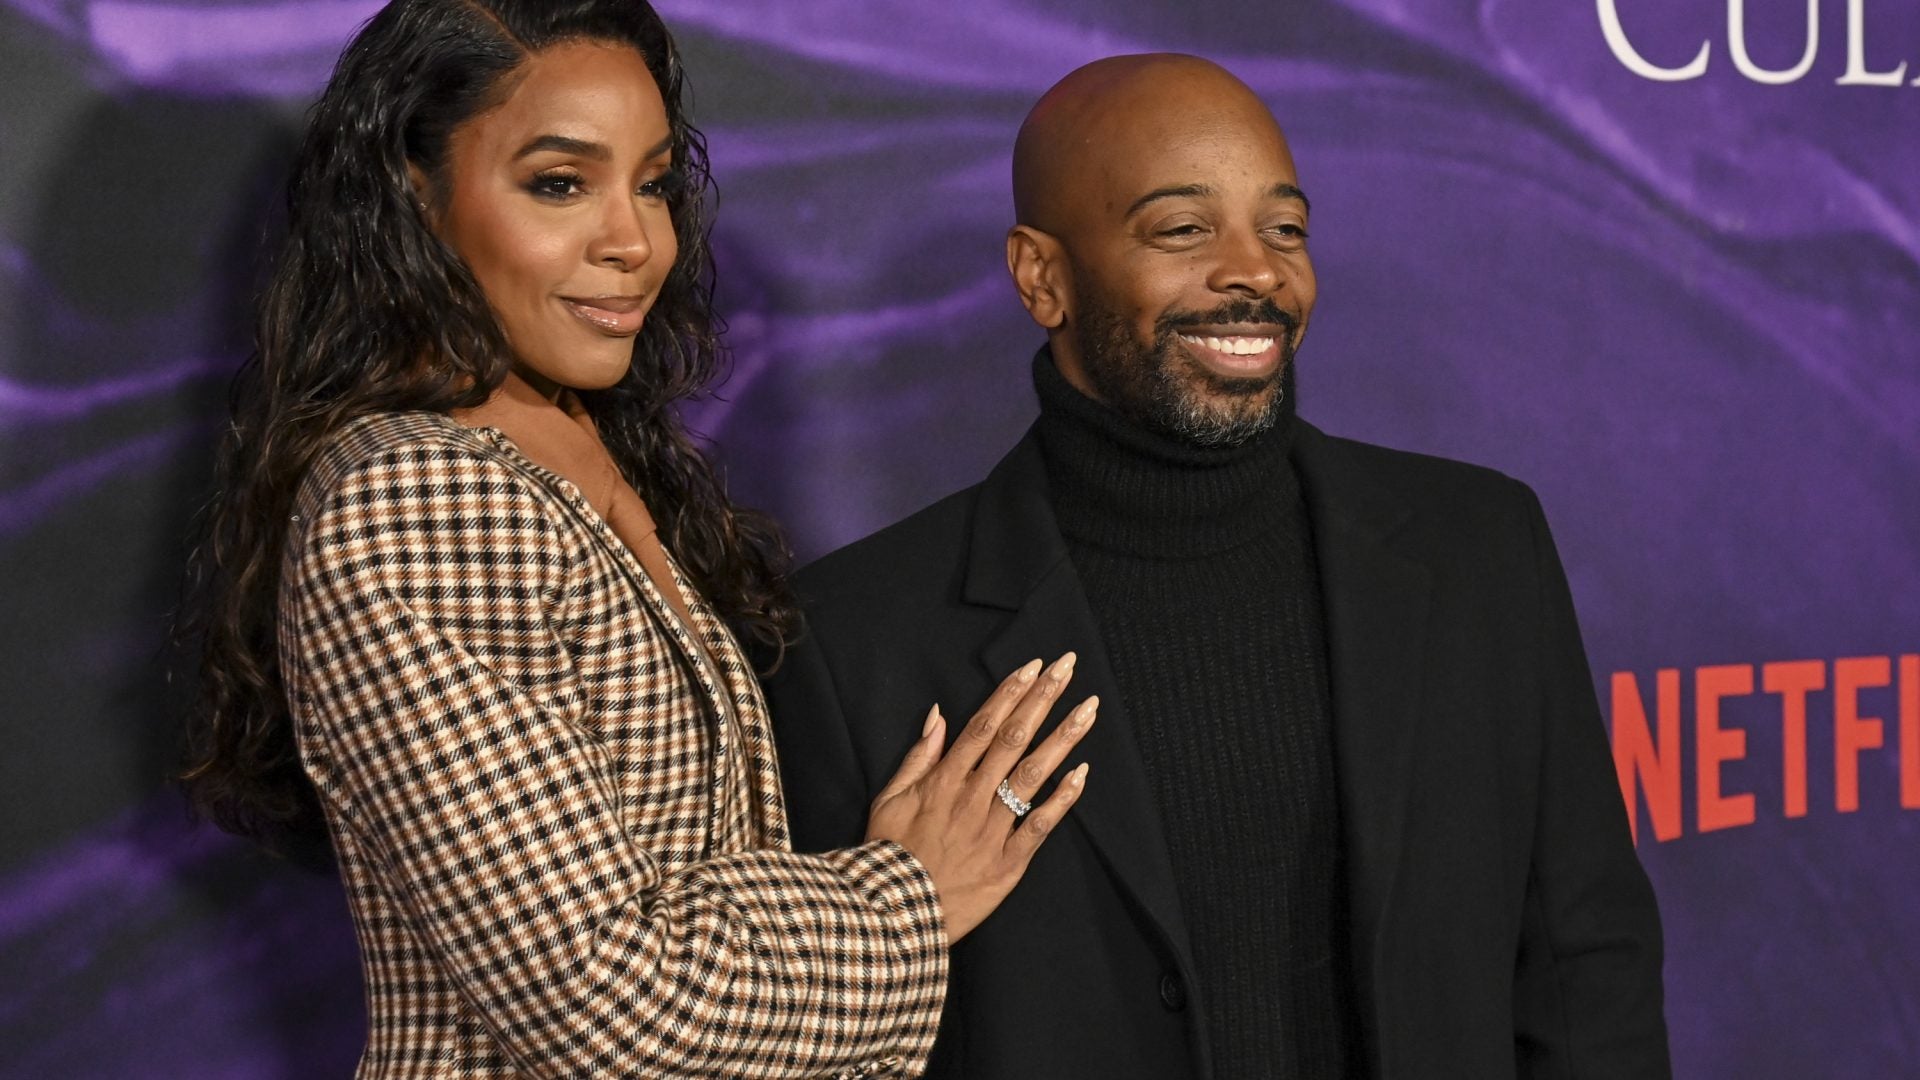 Kelly Rowland Rushed Home To Her Husband After Shooting That 'Mea Culpa' Sex Scene